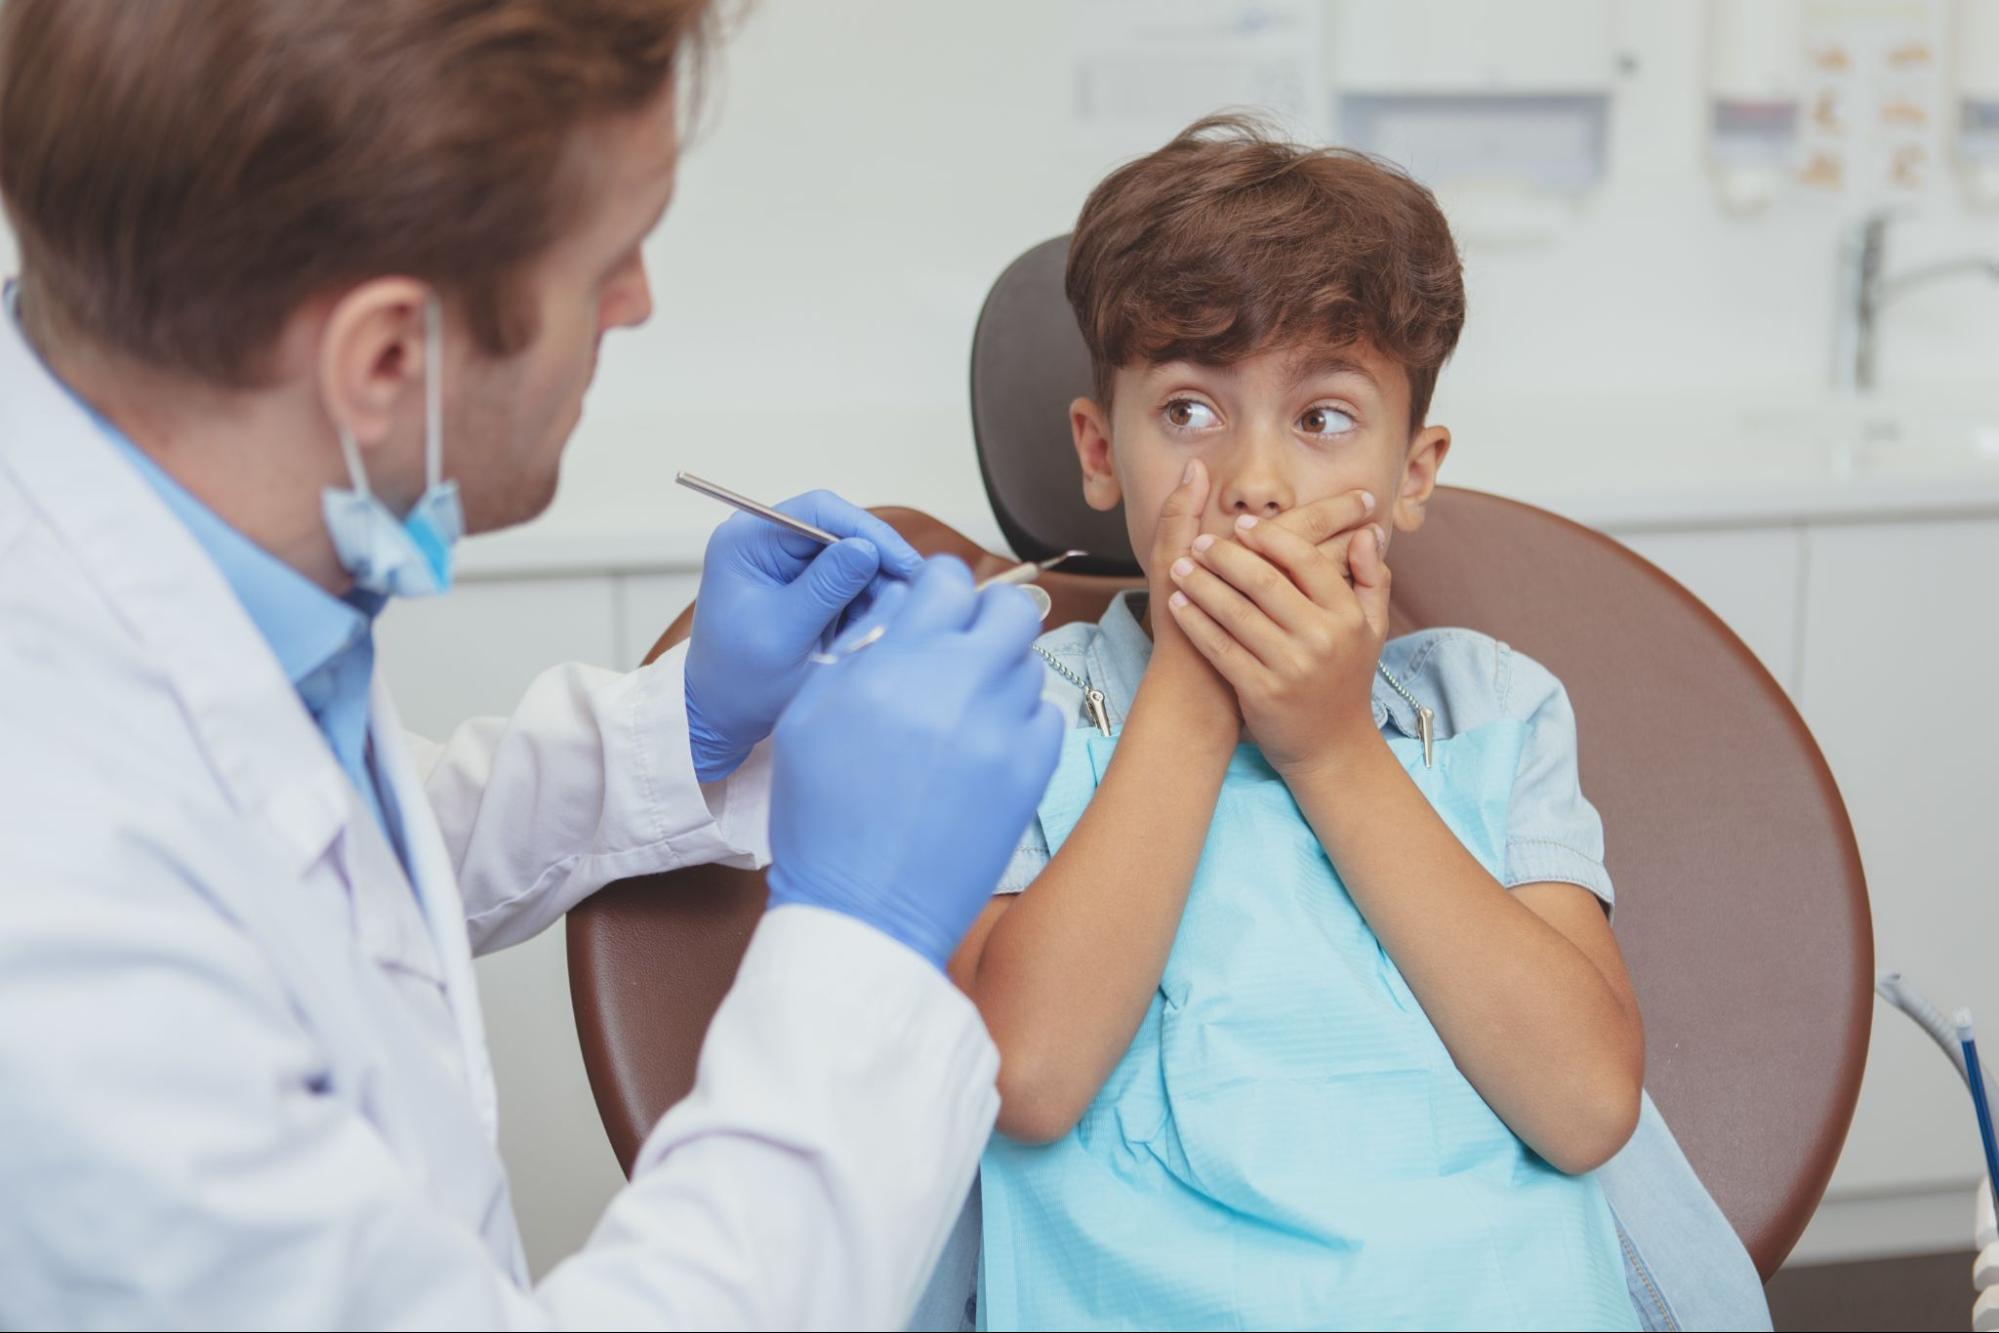 Child Refuses Dental Treatment: How to Overcome Their Fear?